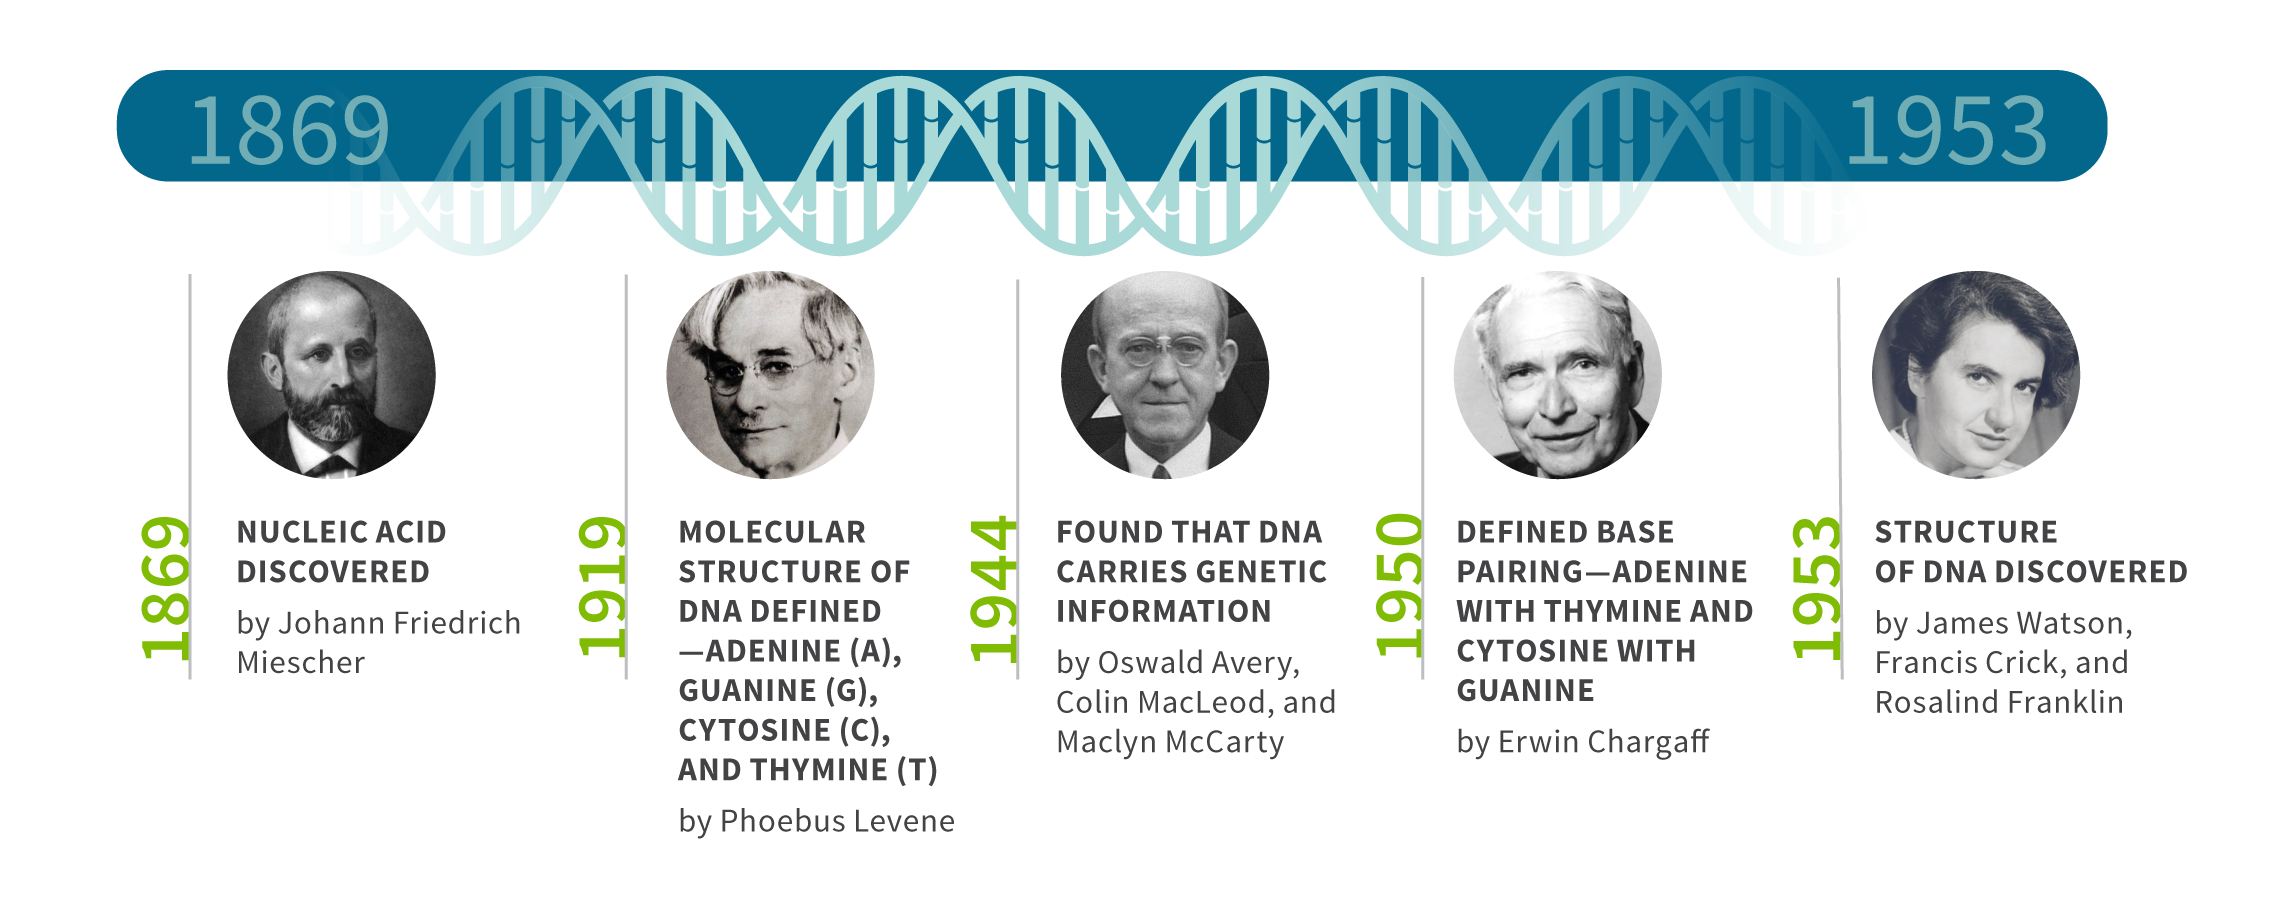 DNA Discovery Timeline